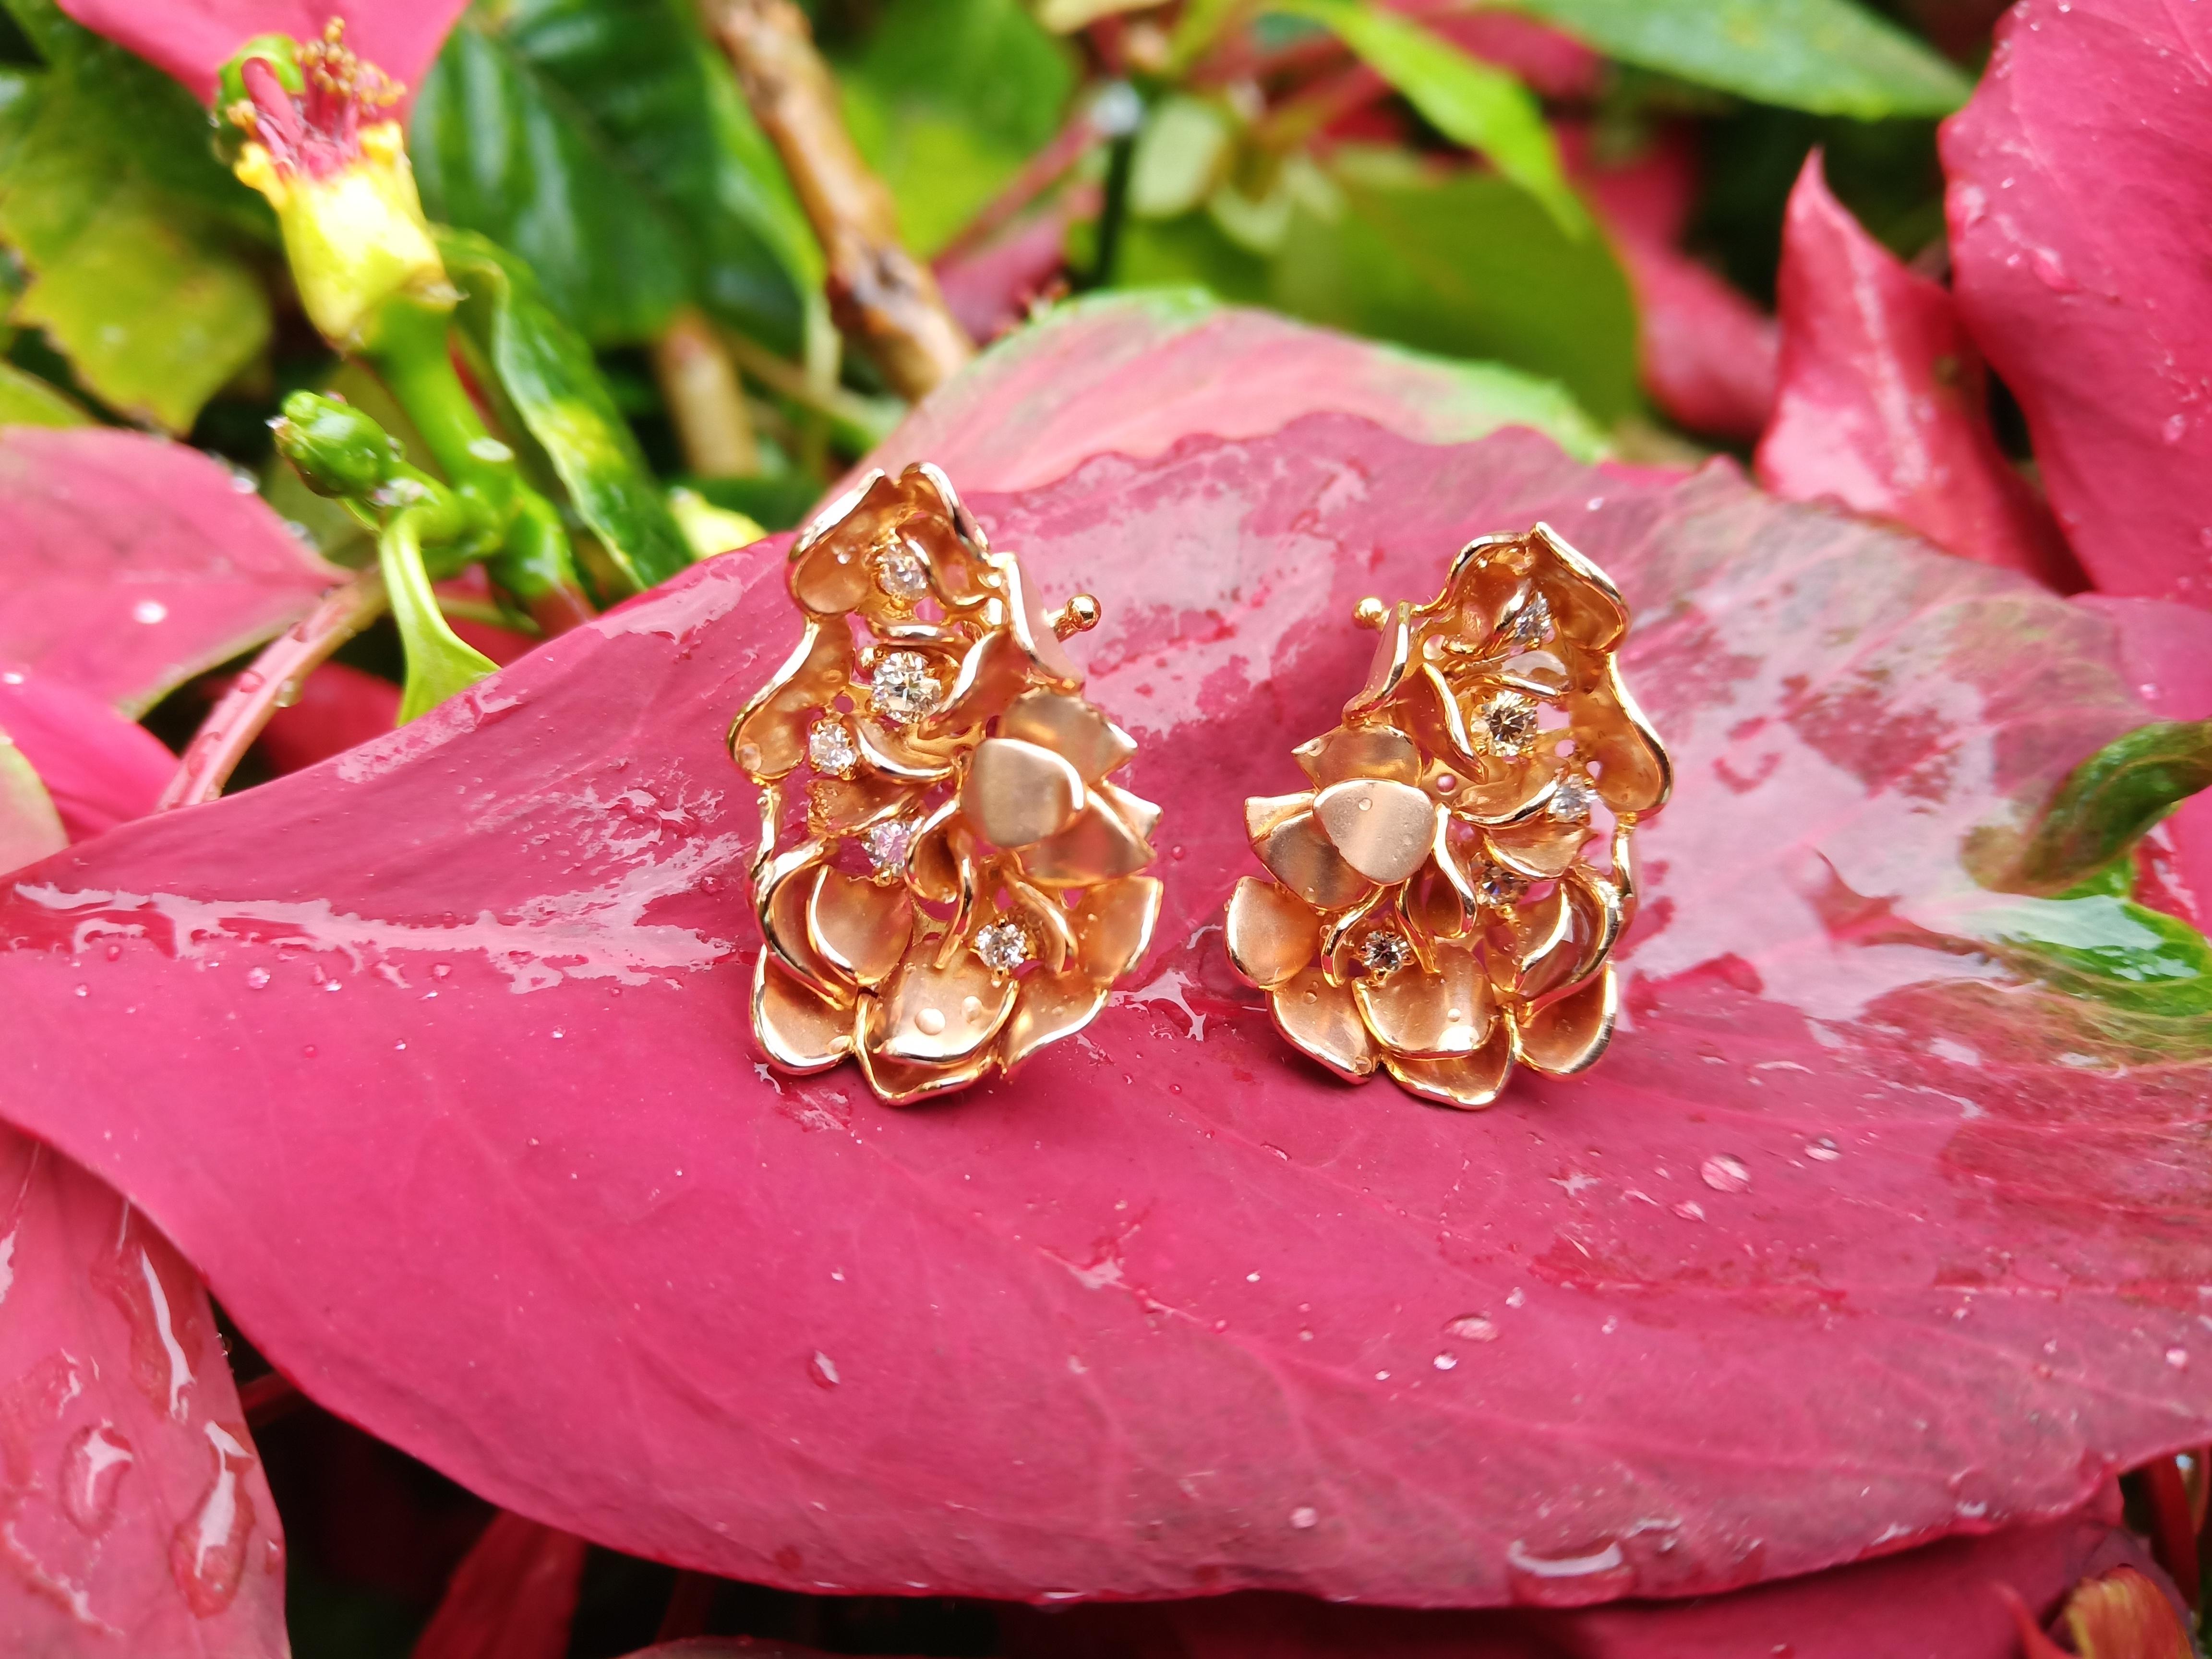 A Palette of Petals creatively set in a pear shaped arrangement with few of them falling of place, intricately finished with glossy edges and dull Yellow Gold surface. This One of A Kind pair of Earrings epitomises Rohit’s penchant to break